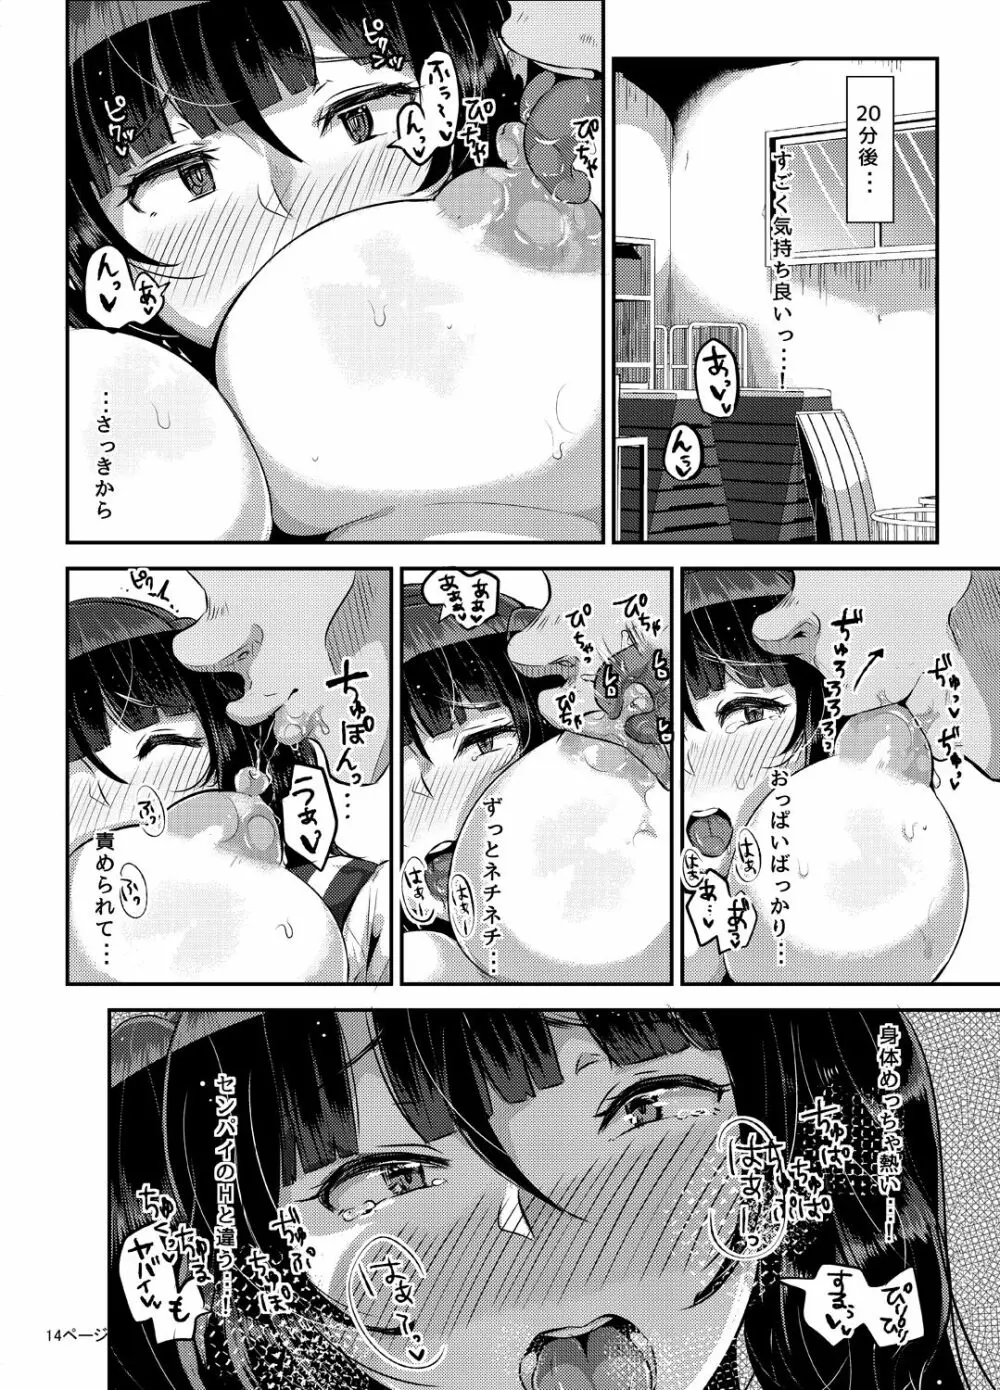 好き好き好き好き好き好き好き好き ver.3 - page15